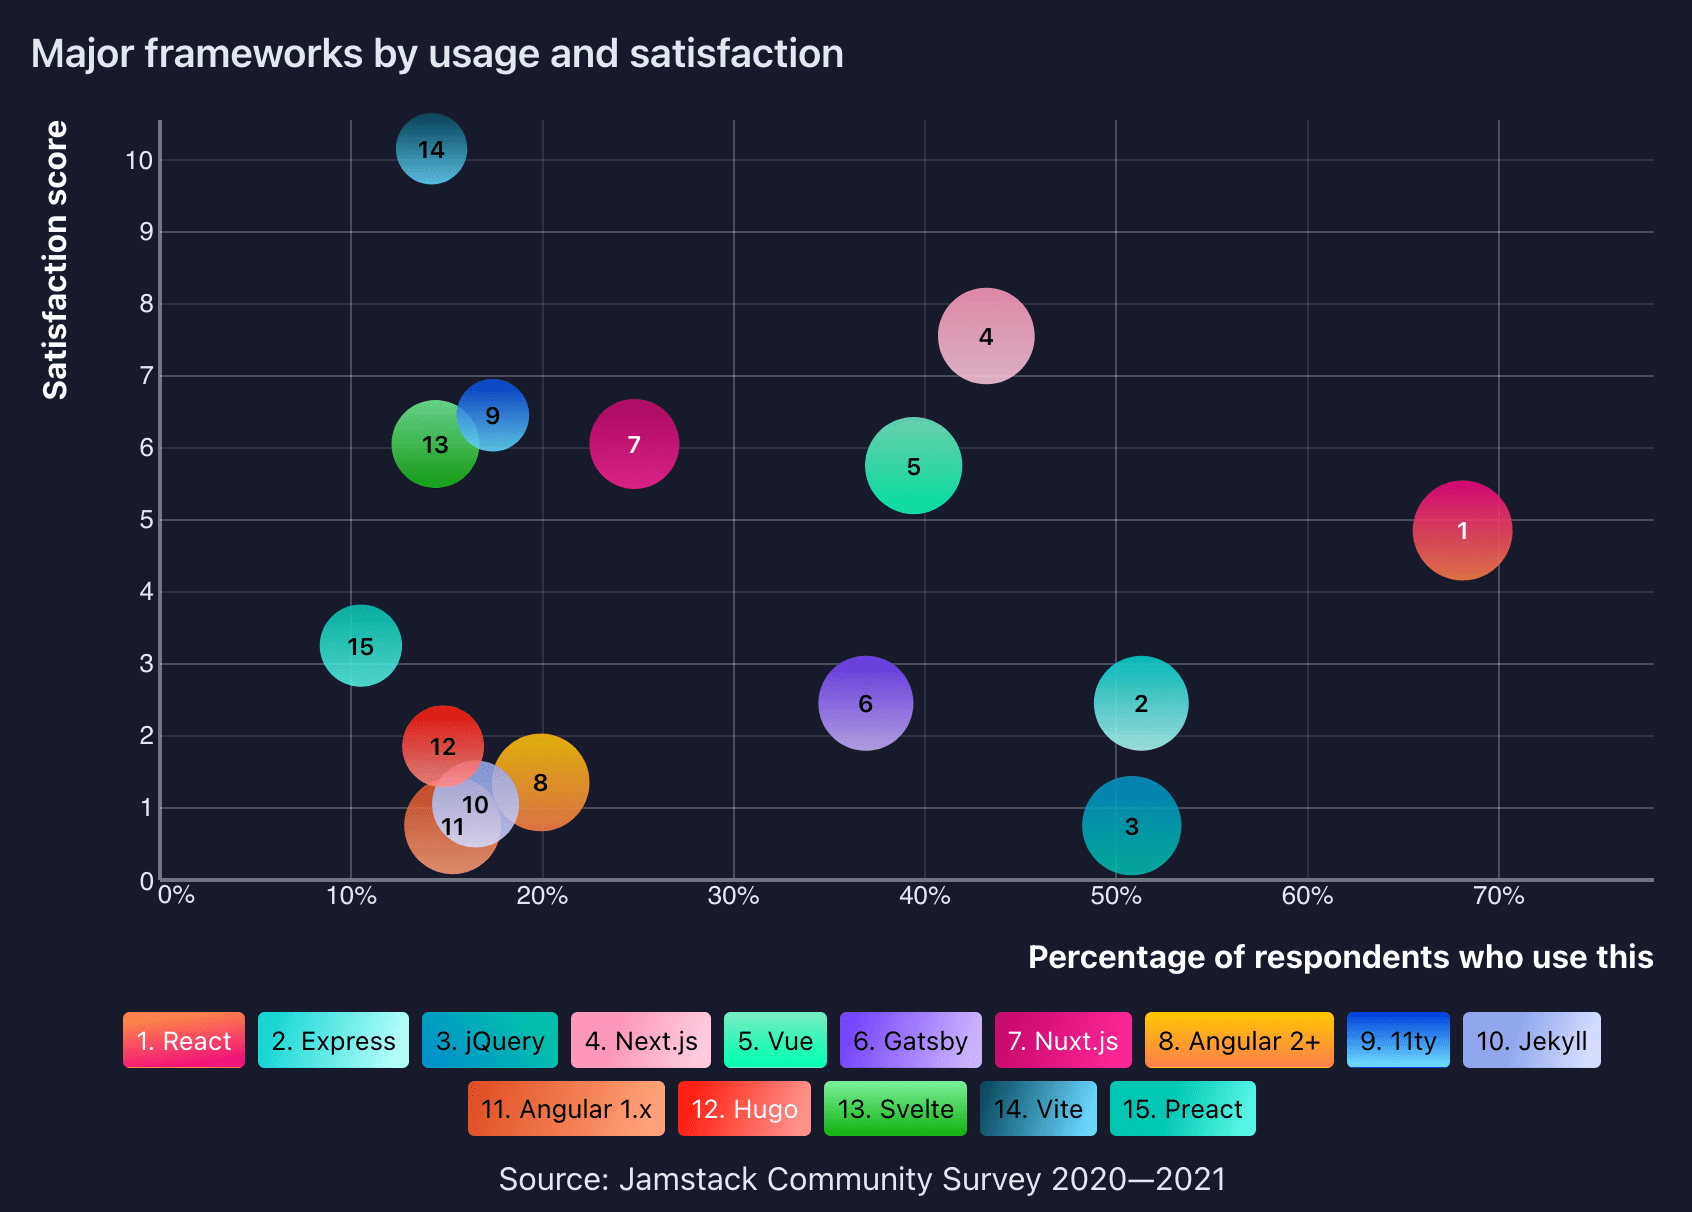 A plot chart with colored dots representing different frameworks. Y axis is satisfaction, x-axis is usage.React is at the far right, but halfway up the satisfaction axis. Express is at the top of the satisfaction axis but between 10-20% usage.